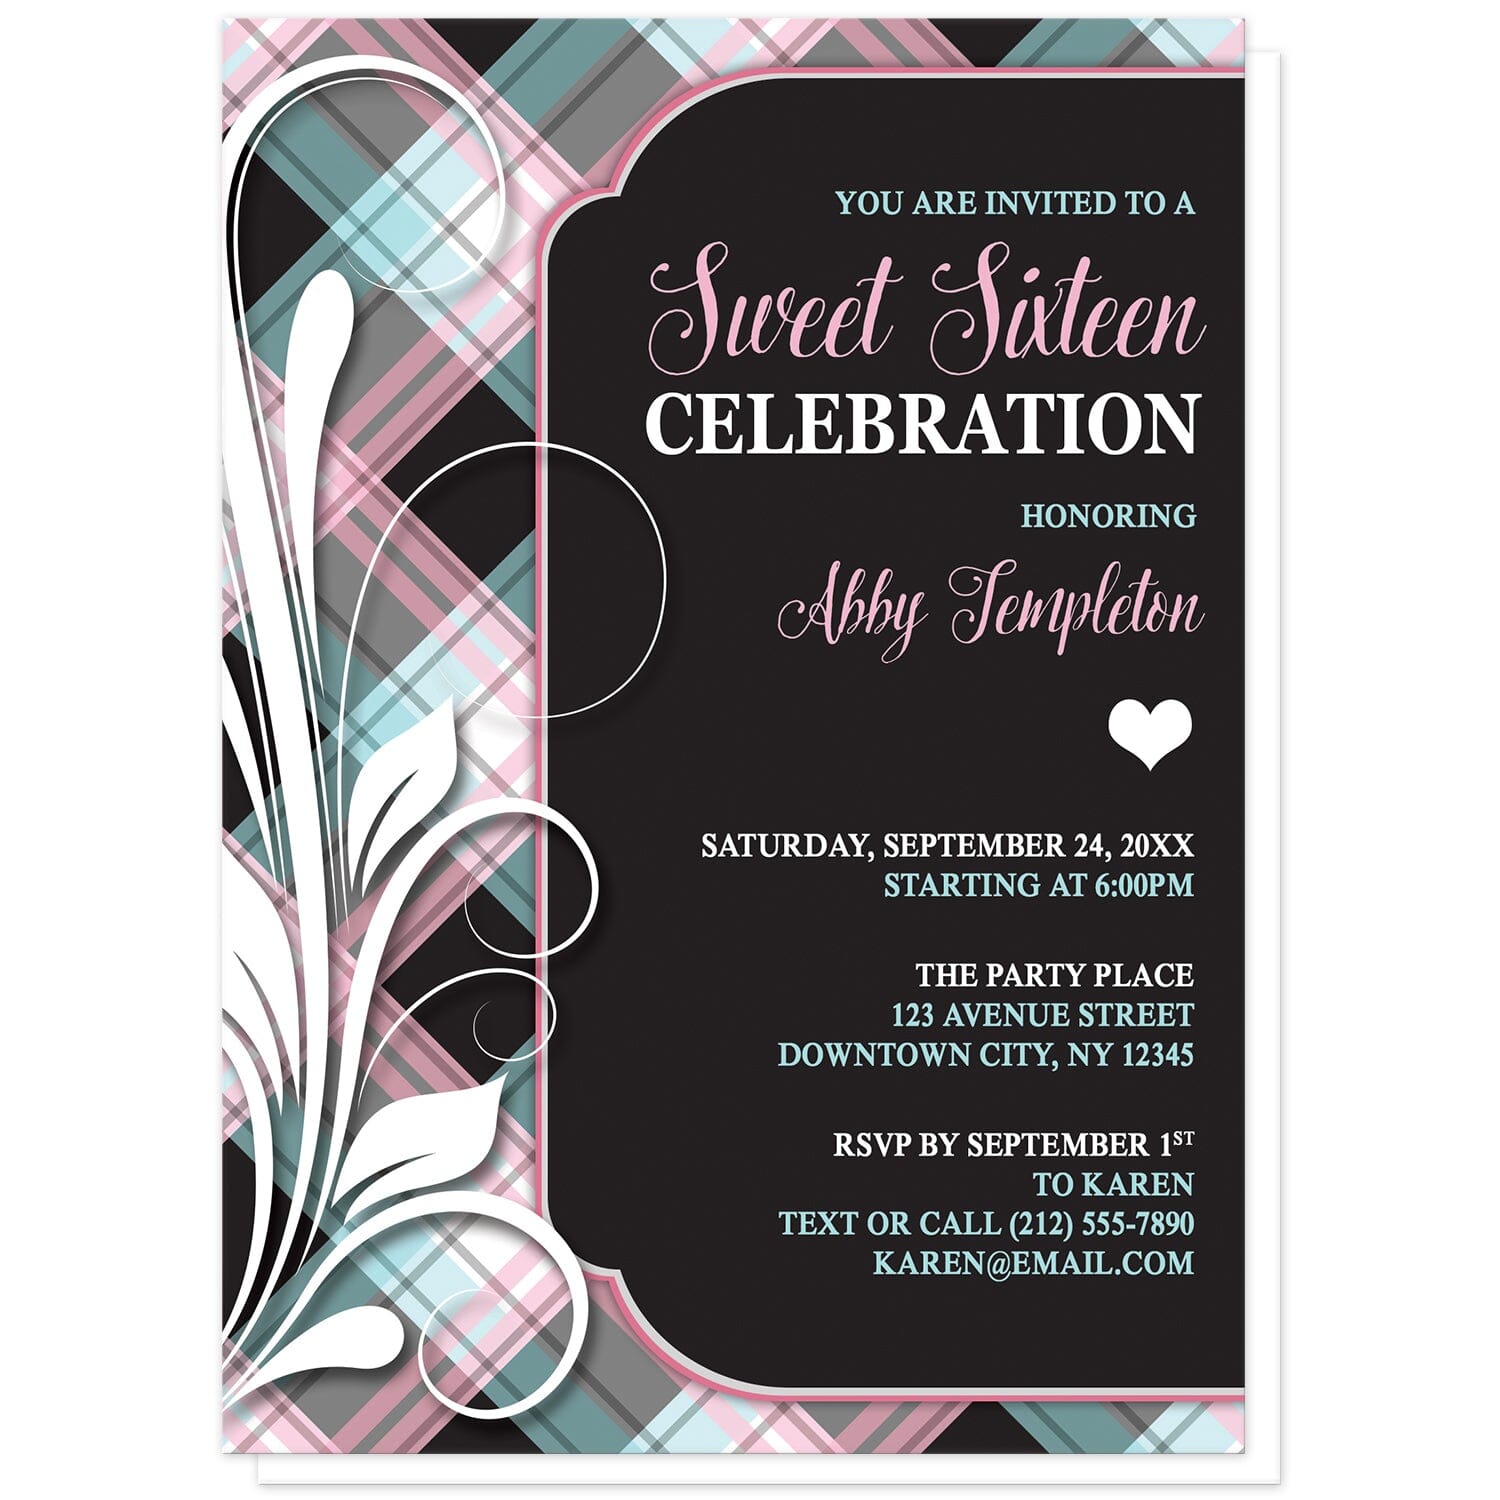 Pink Blue and Black Plaid Flourish Sweet 16 Invitations at Artistically Invited. Modern and alternative pink blue and black plaid flourish sweet 16 invitations with your personalized birthday party details custom printed over a solid black frame design to the right sided with a large white flourish over a pink, blue, and black plaid pattern background along the left side.